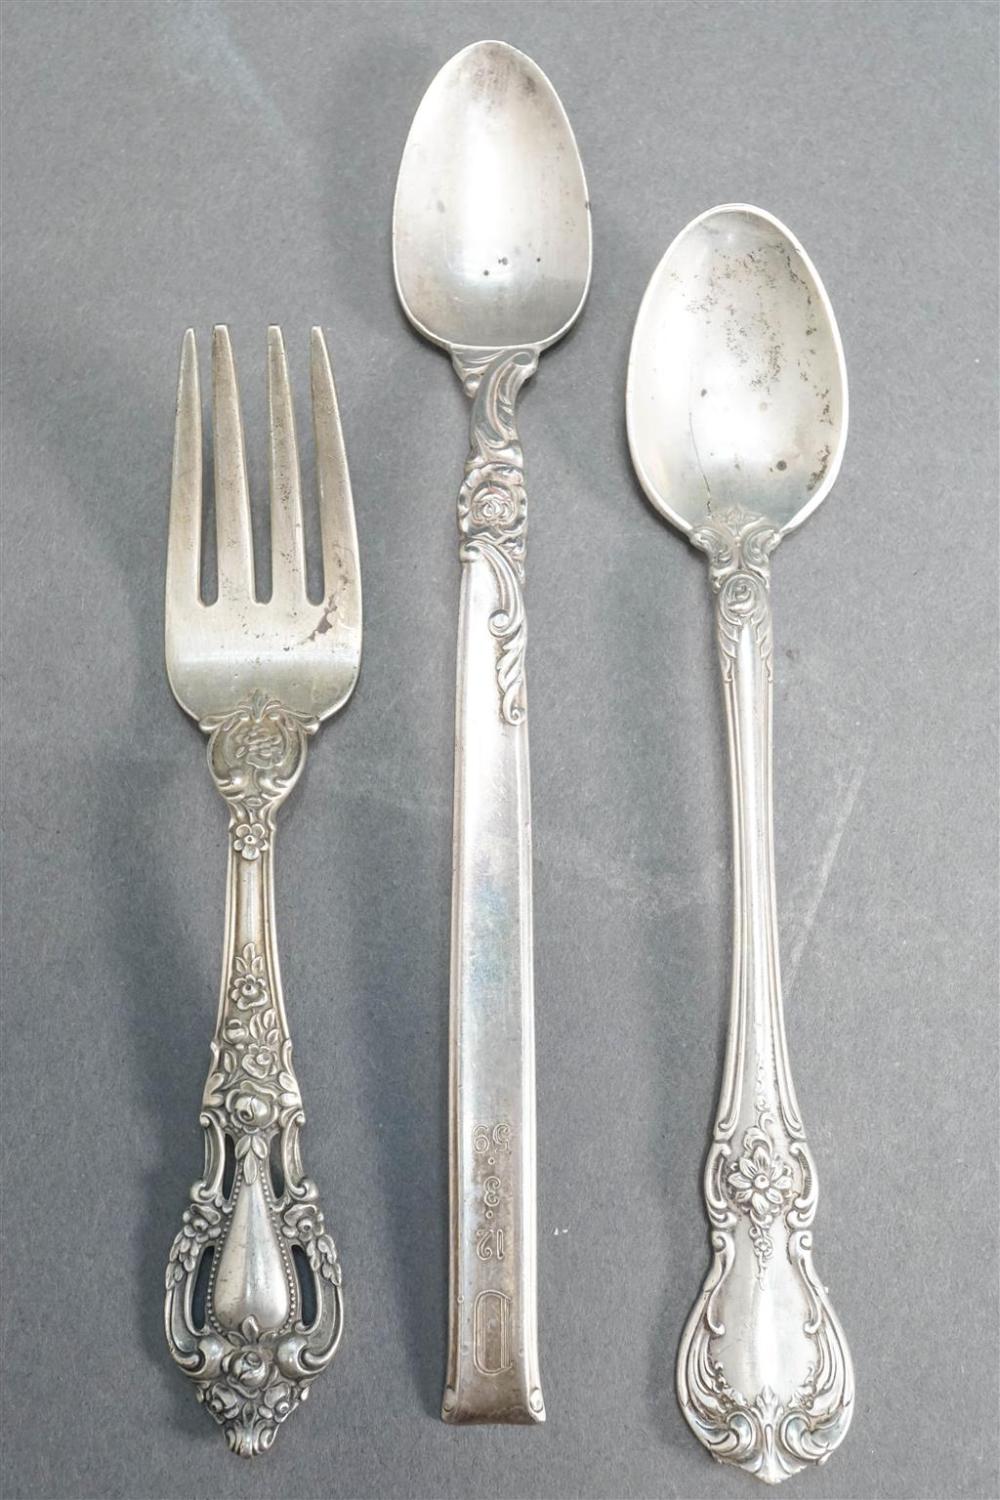 GROUP OF THREE AMERICAN STERLING